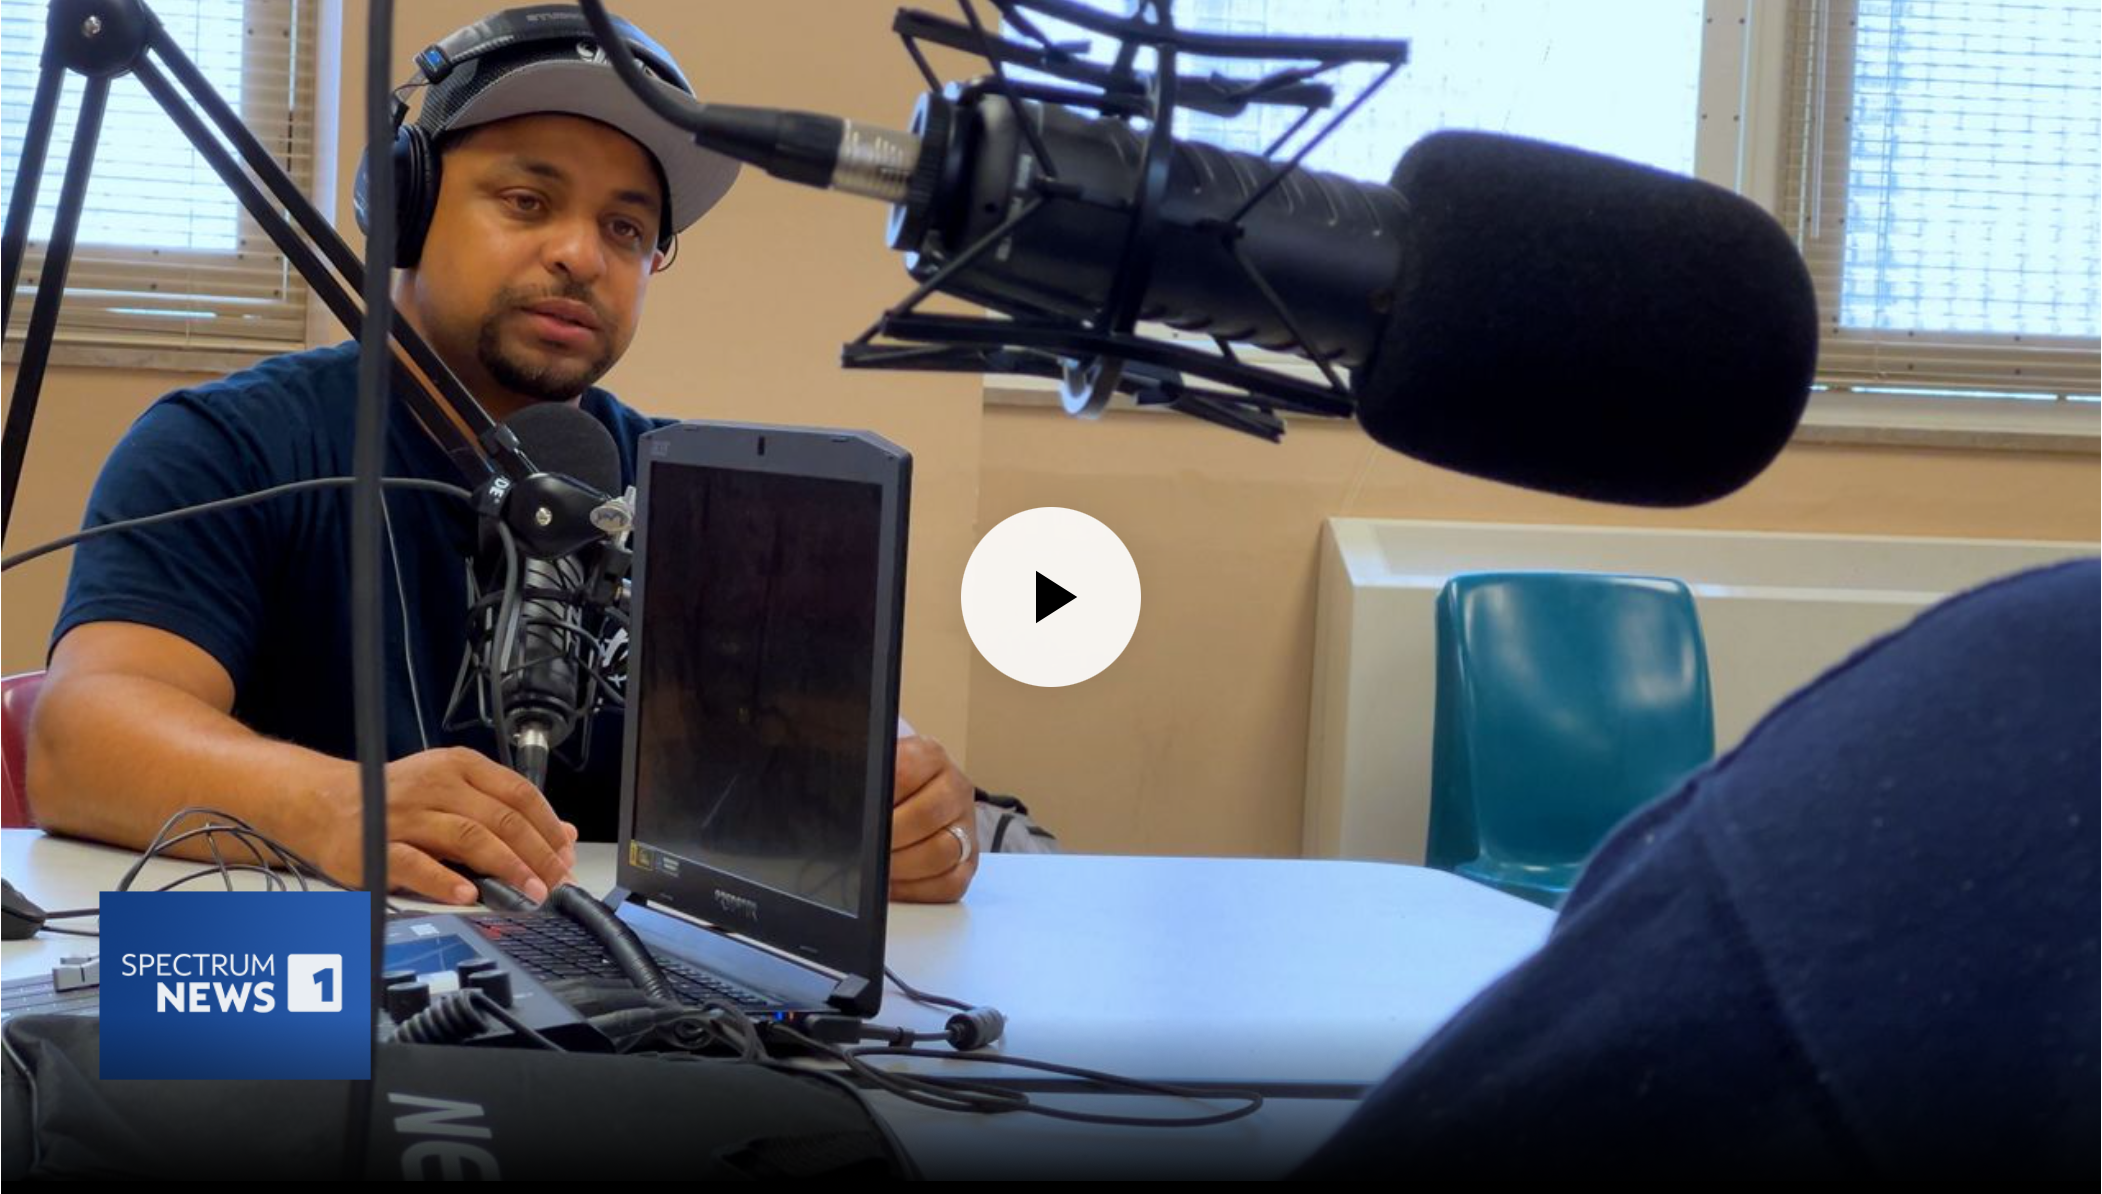 Juvenile Court podcast workshops led by Dee Star from OuttaDeeBox podcast